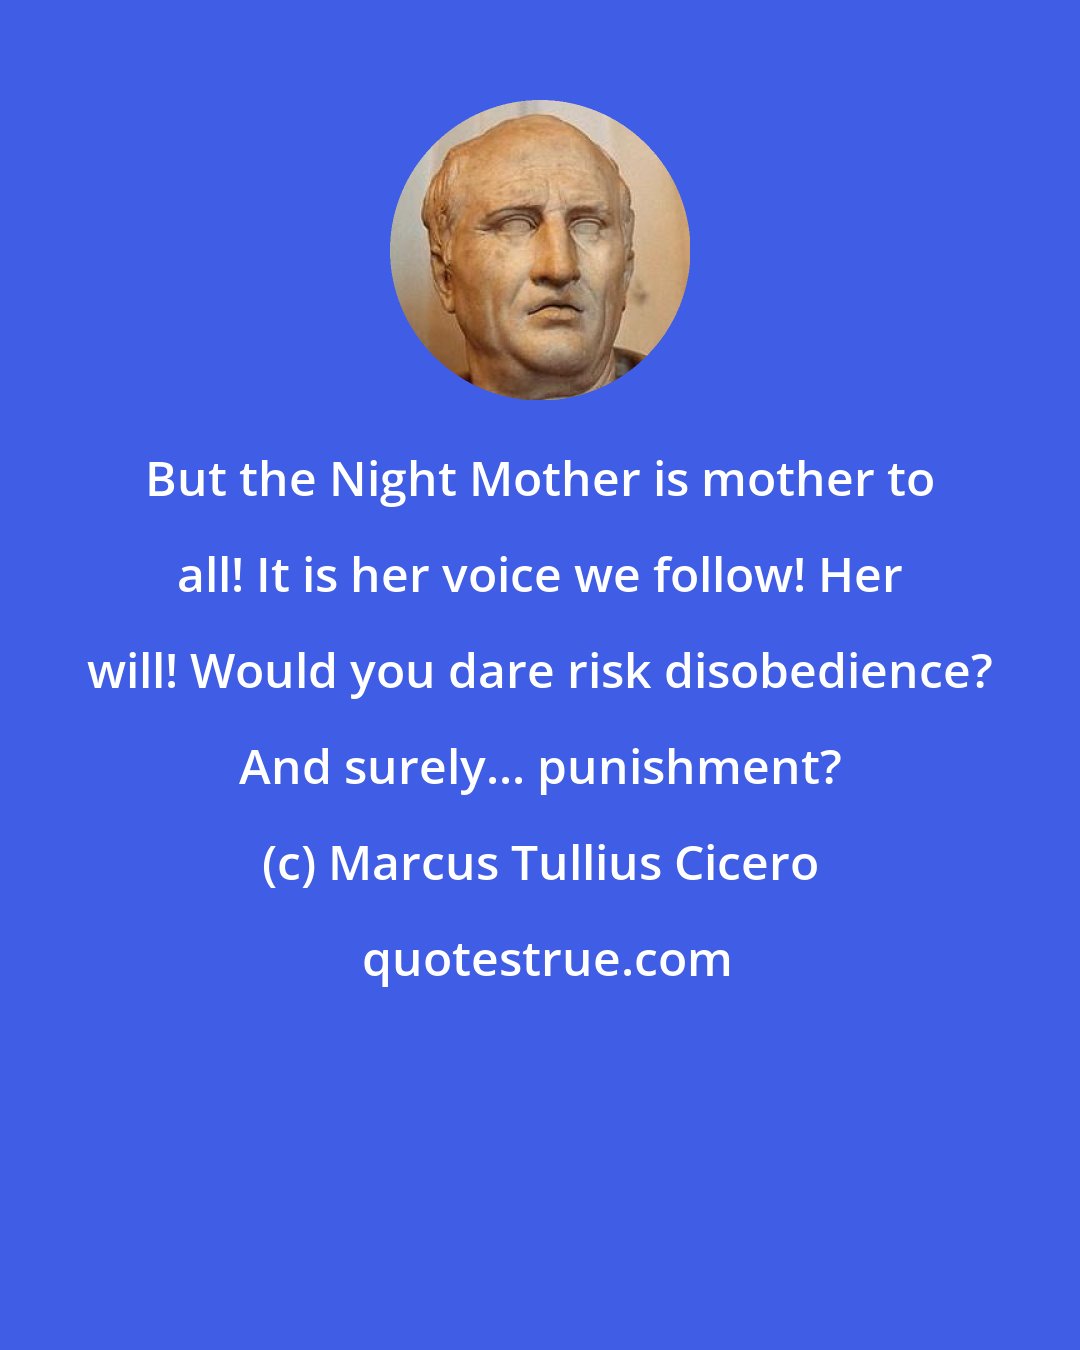 Marcus Tullius Cicero: But the Night Mother is mother to all! It is her voice we follow! Her will! Would you dare risk disobedience? And surely... punishment?